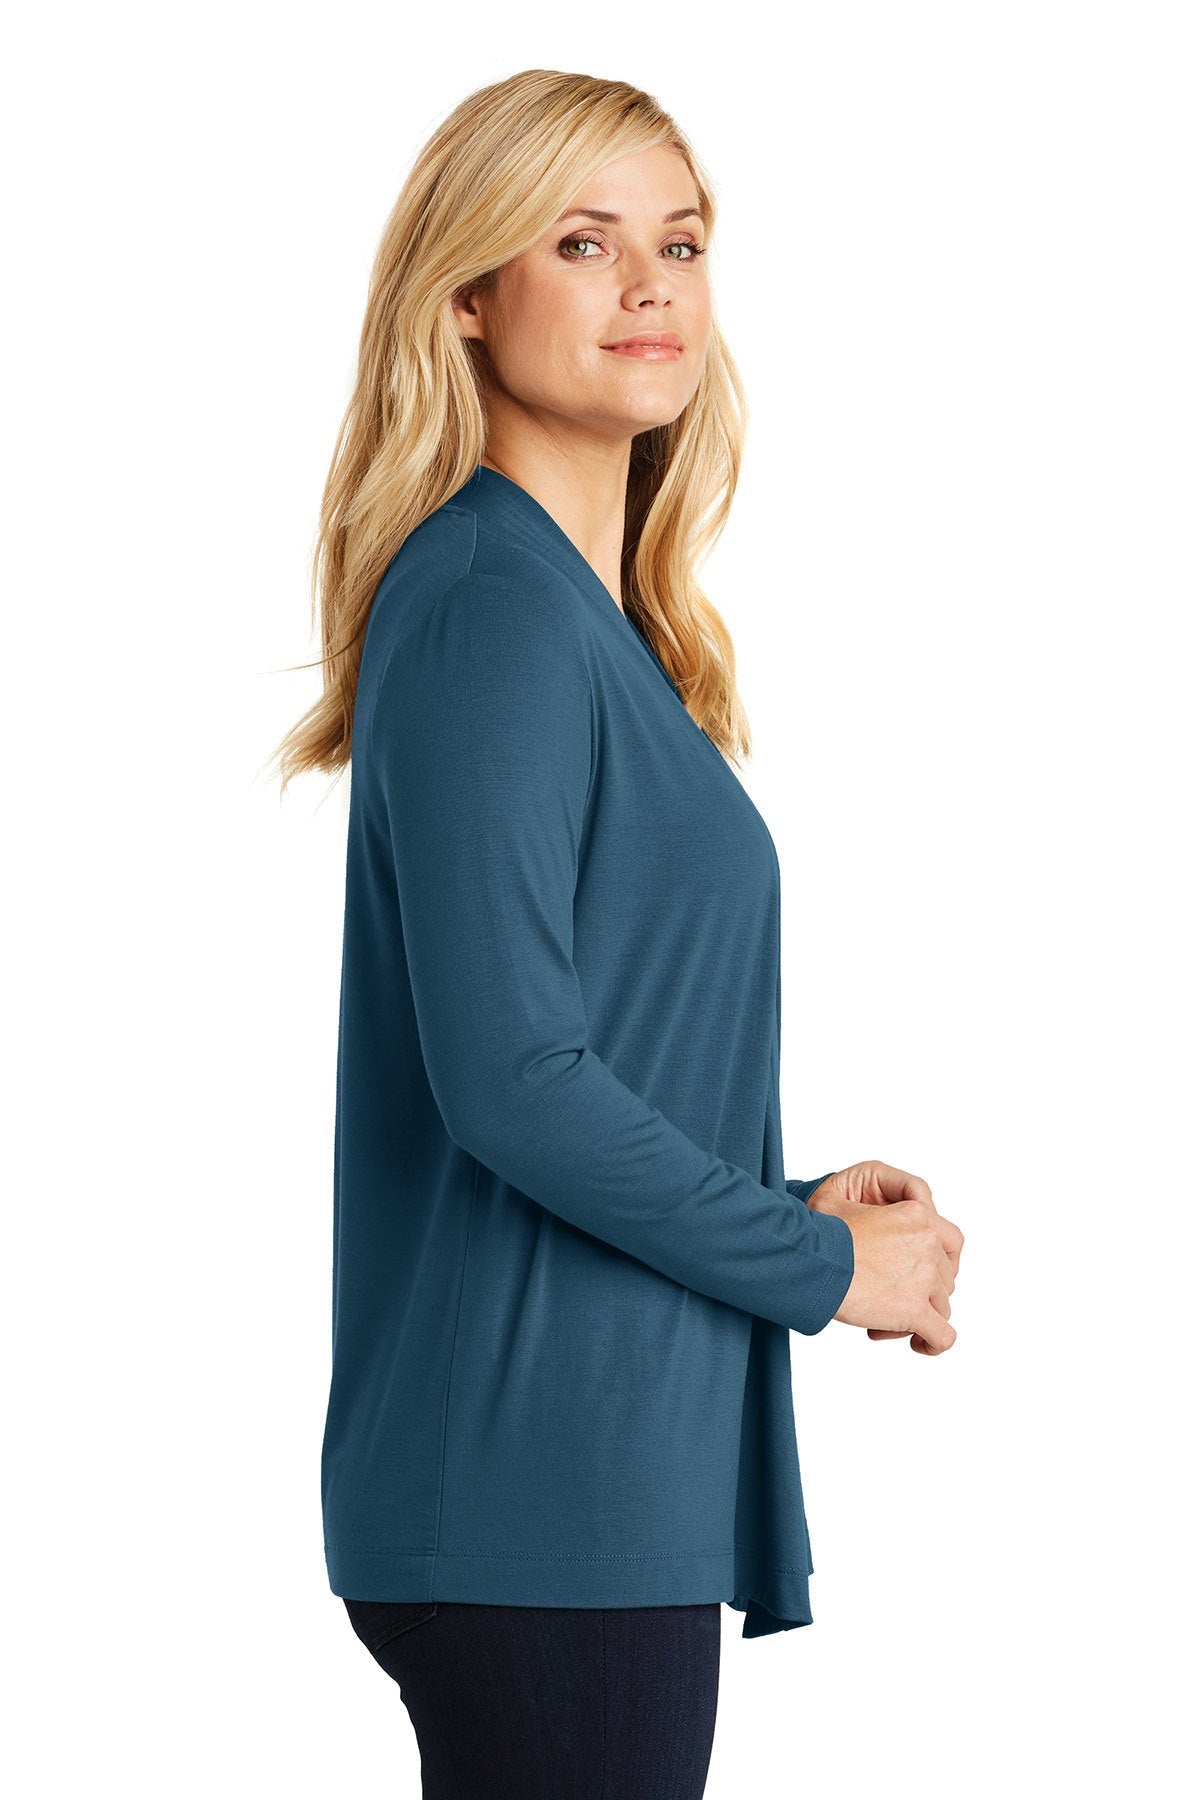 Port Authority Ladies Branded Concept Knit Cardigans, Dusty Blue